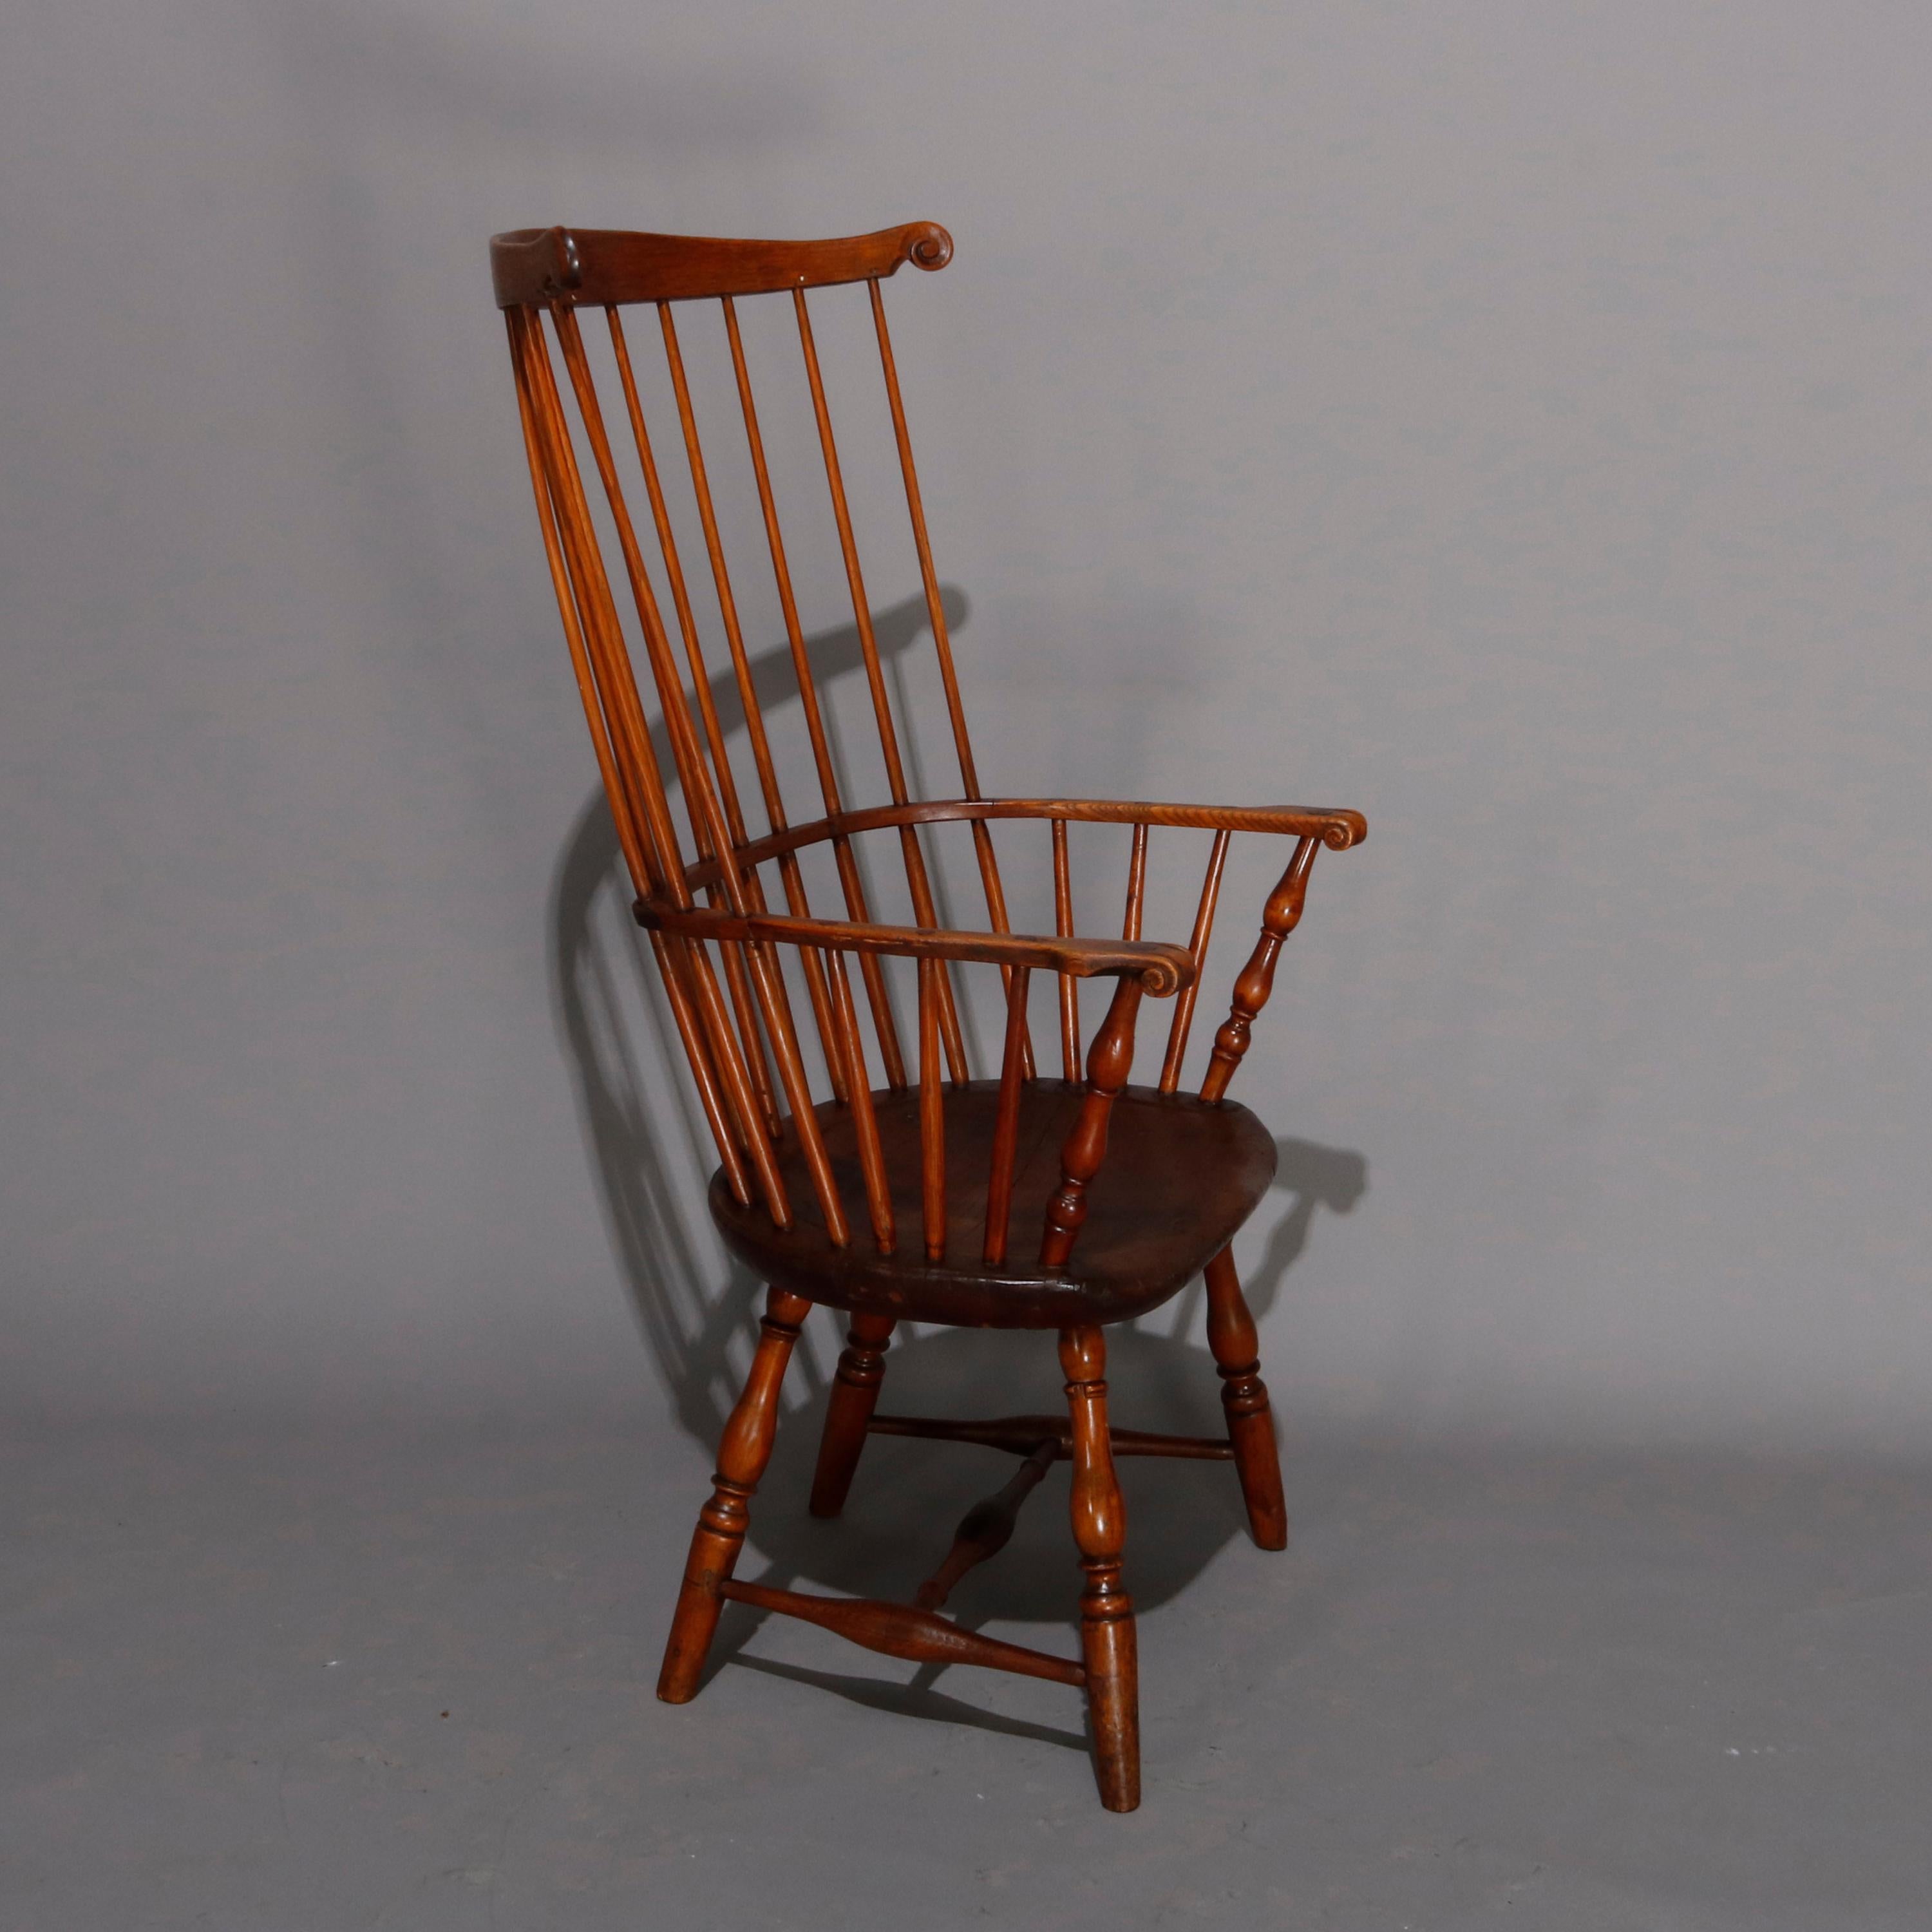 A Colonial style Philadelphia Windsor style chair features oak pegged construction with fan back and arms having spindles surmounting formed seat and raised on turned legs, 20th century

Measures: 44.5